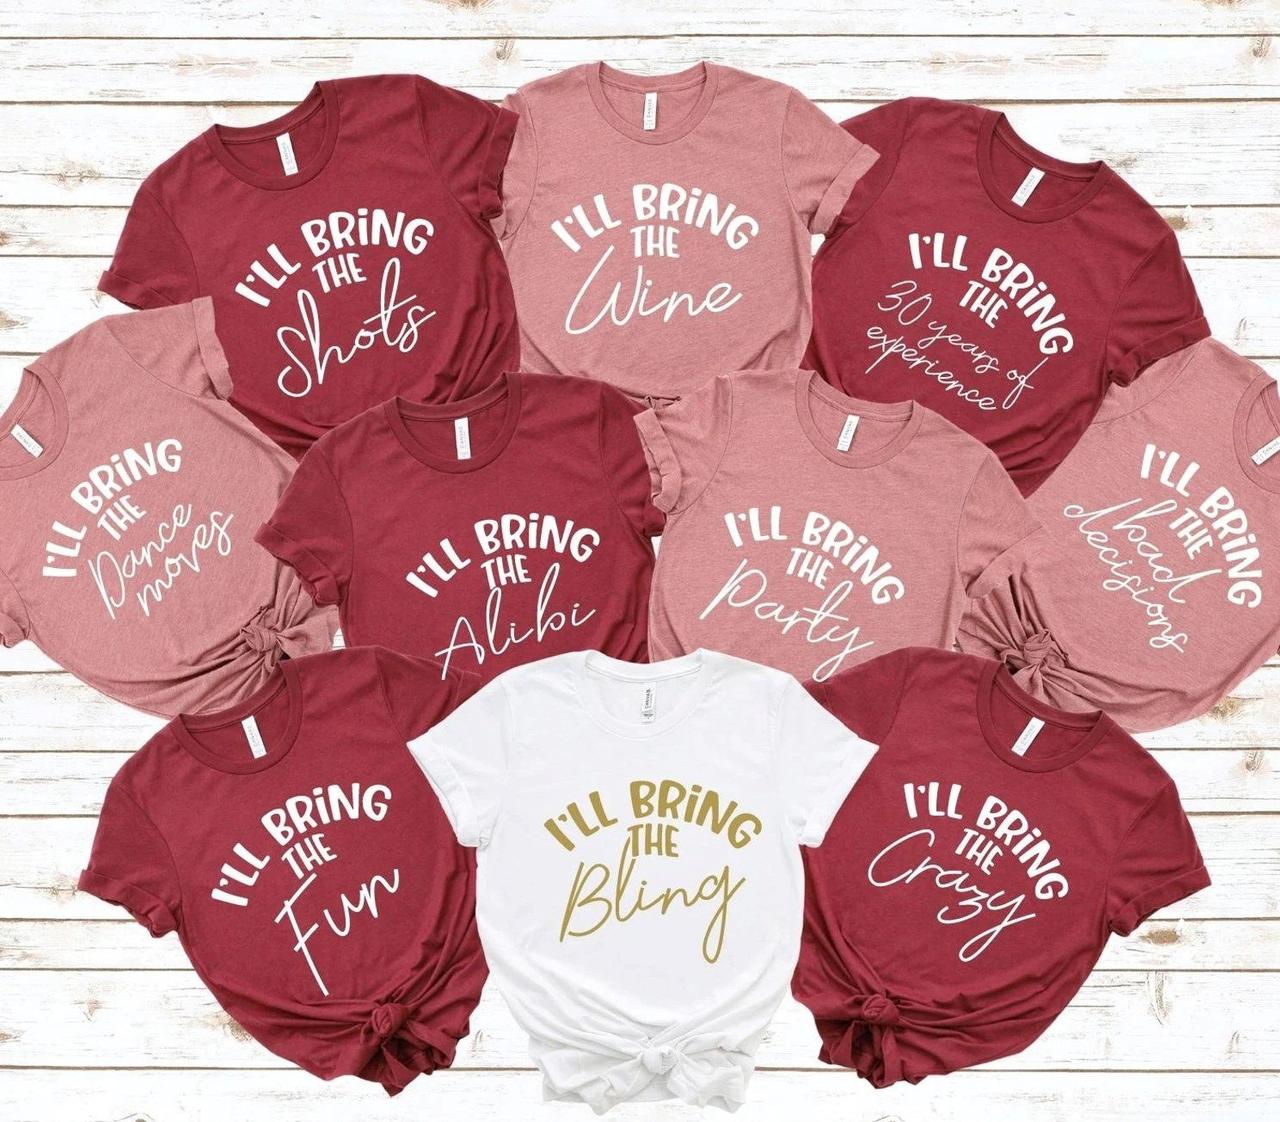 Hen Do T Shirts From Classy To Tacky Uk